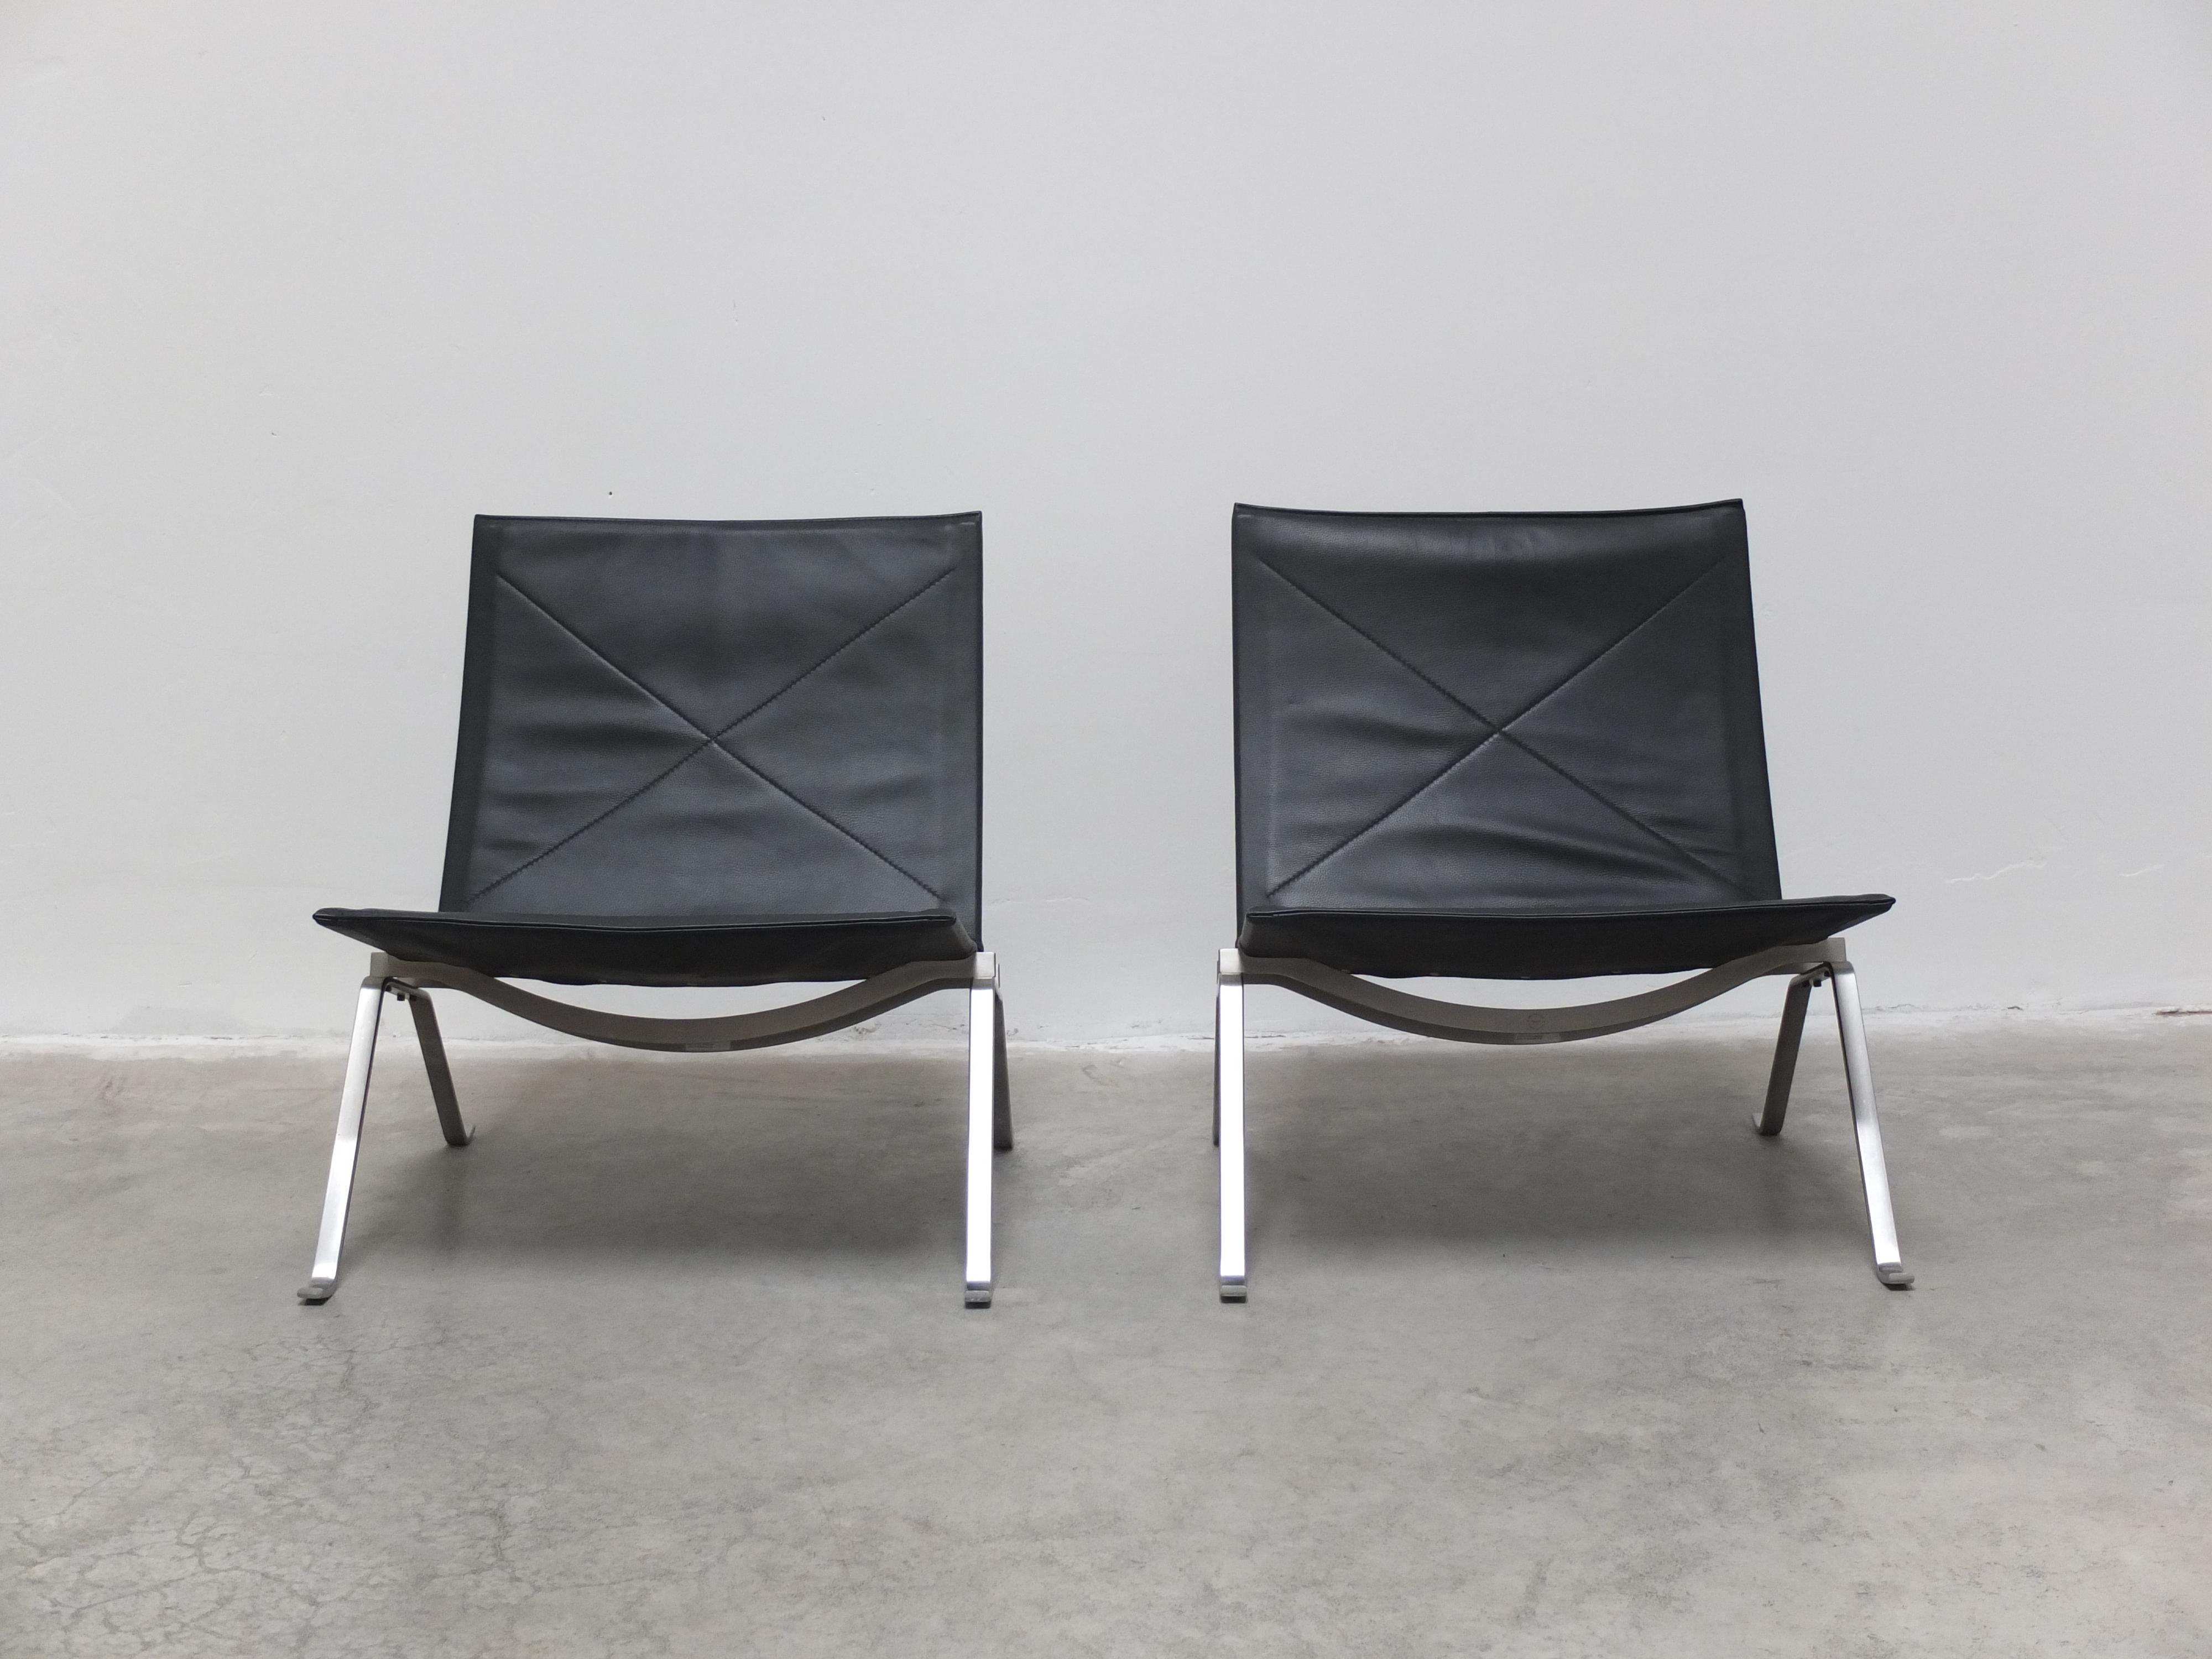 Great original pair of ‘PK22’ easy chairs designed by Poul Kjærholm in 1956. This is a beautiful black leather edition produced by Fritz Hansen in 2006 with the maker’s logo present. Great minimalist design with high-end materials and perfect